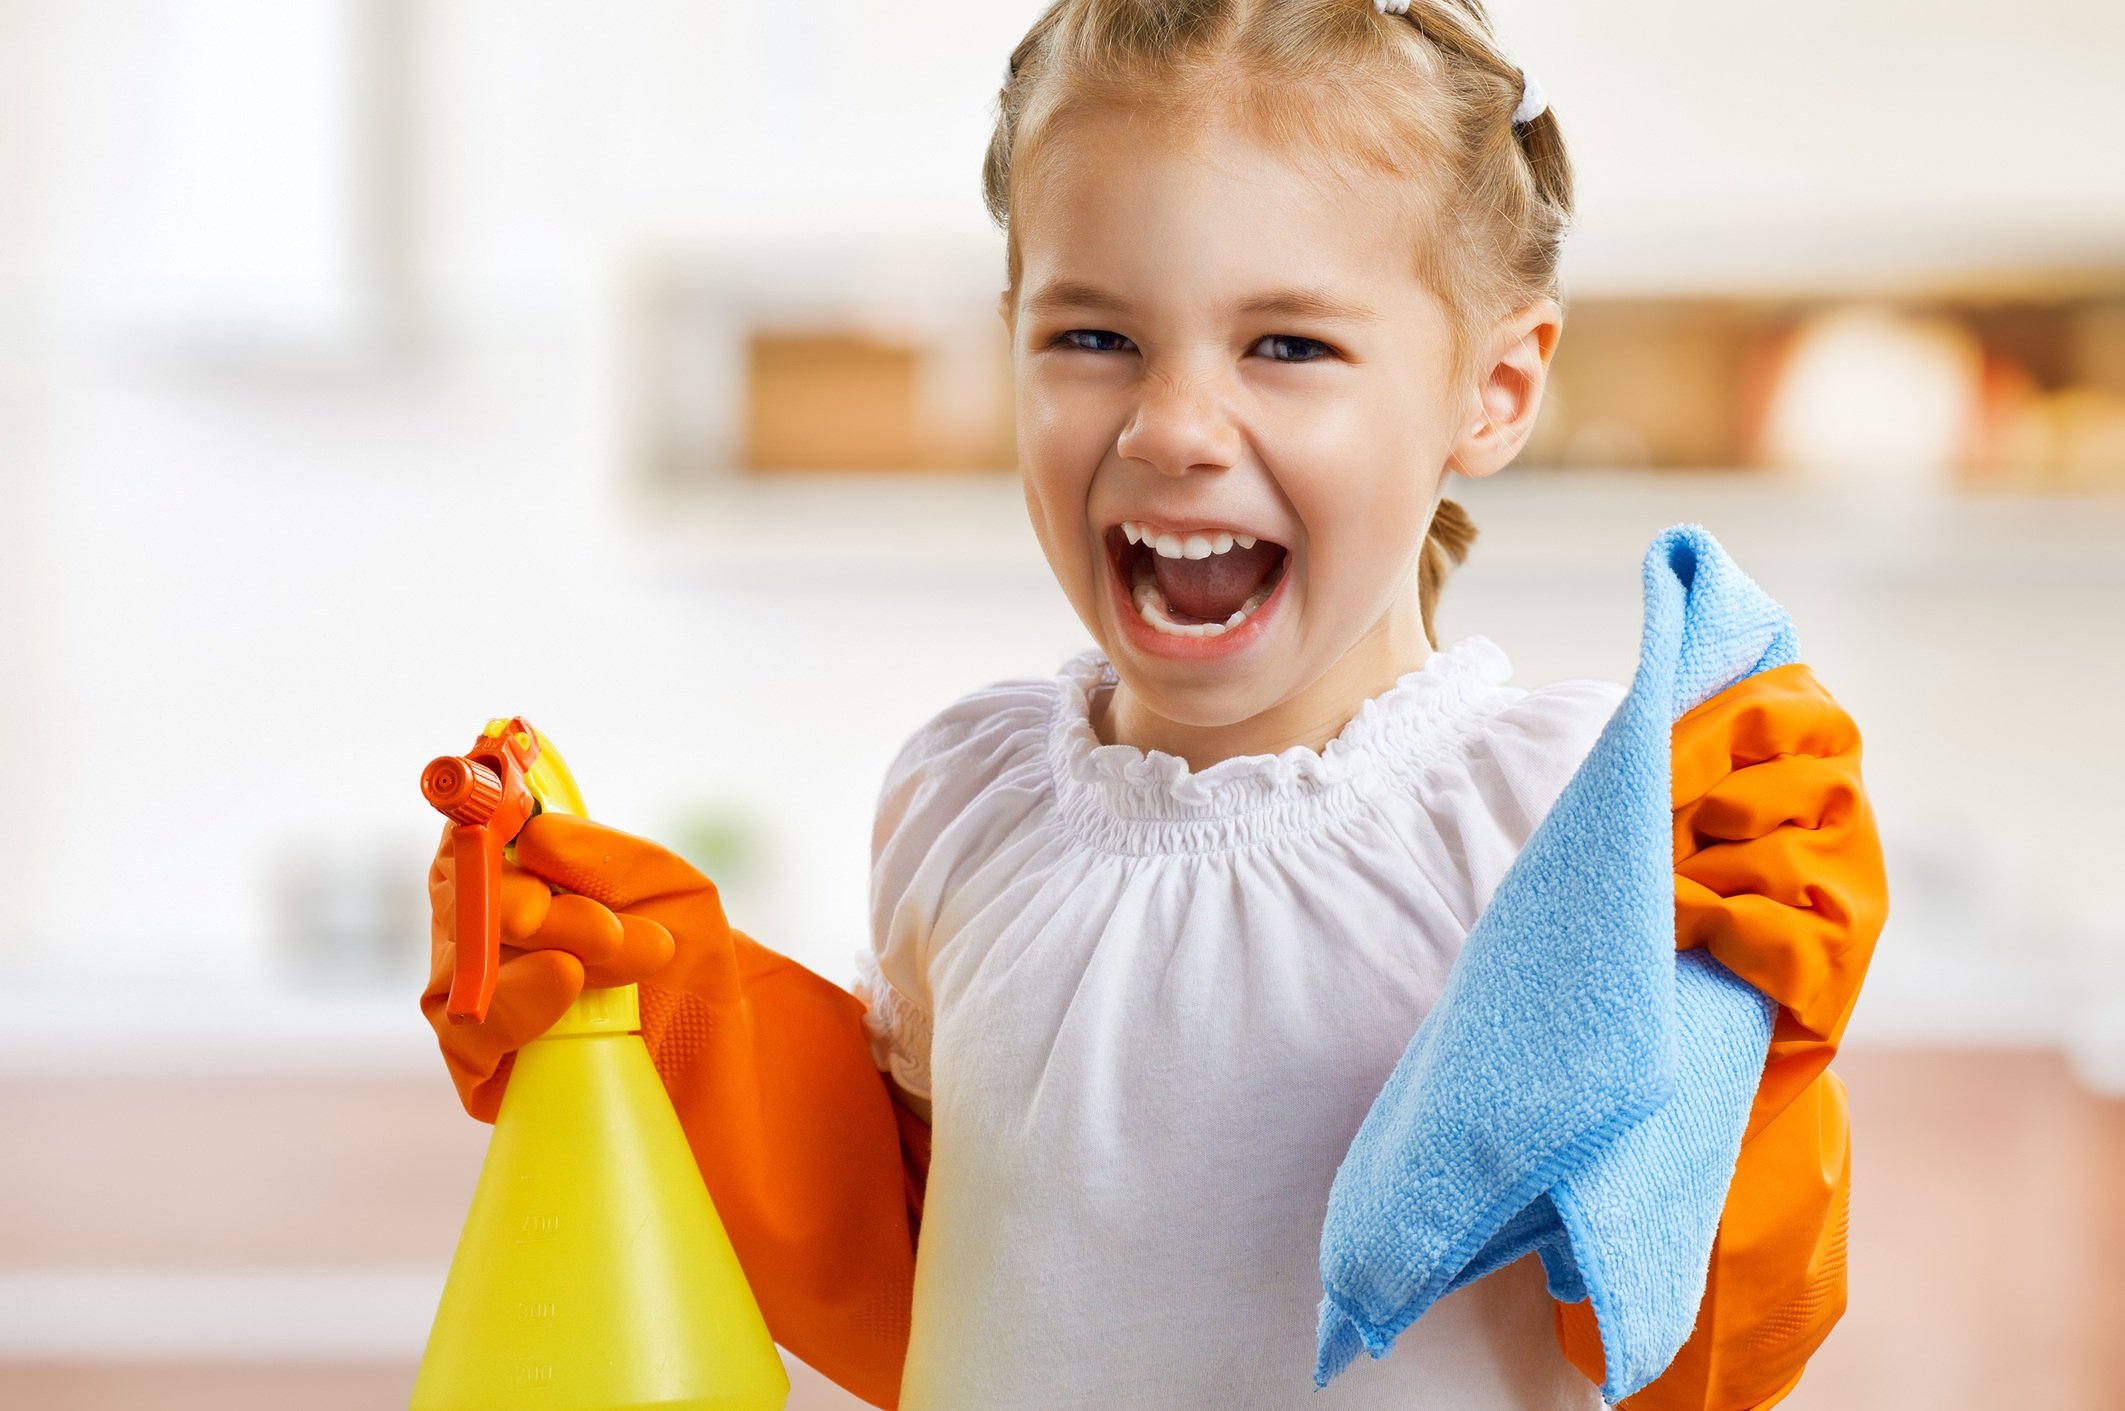 Little girl doing chores and cleaning